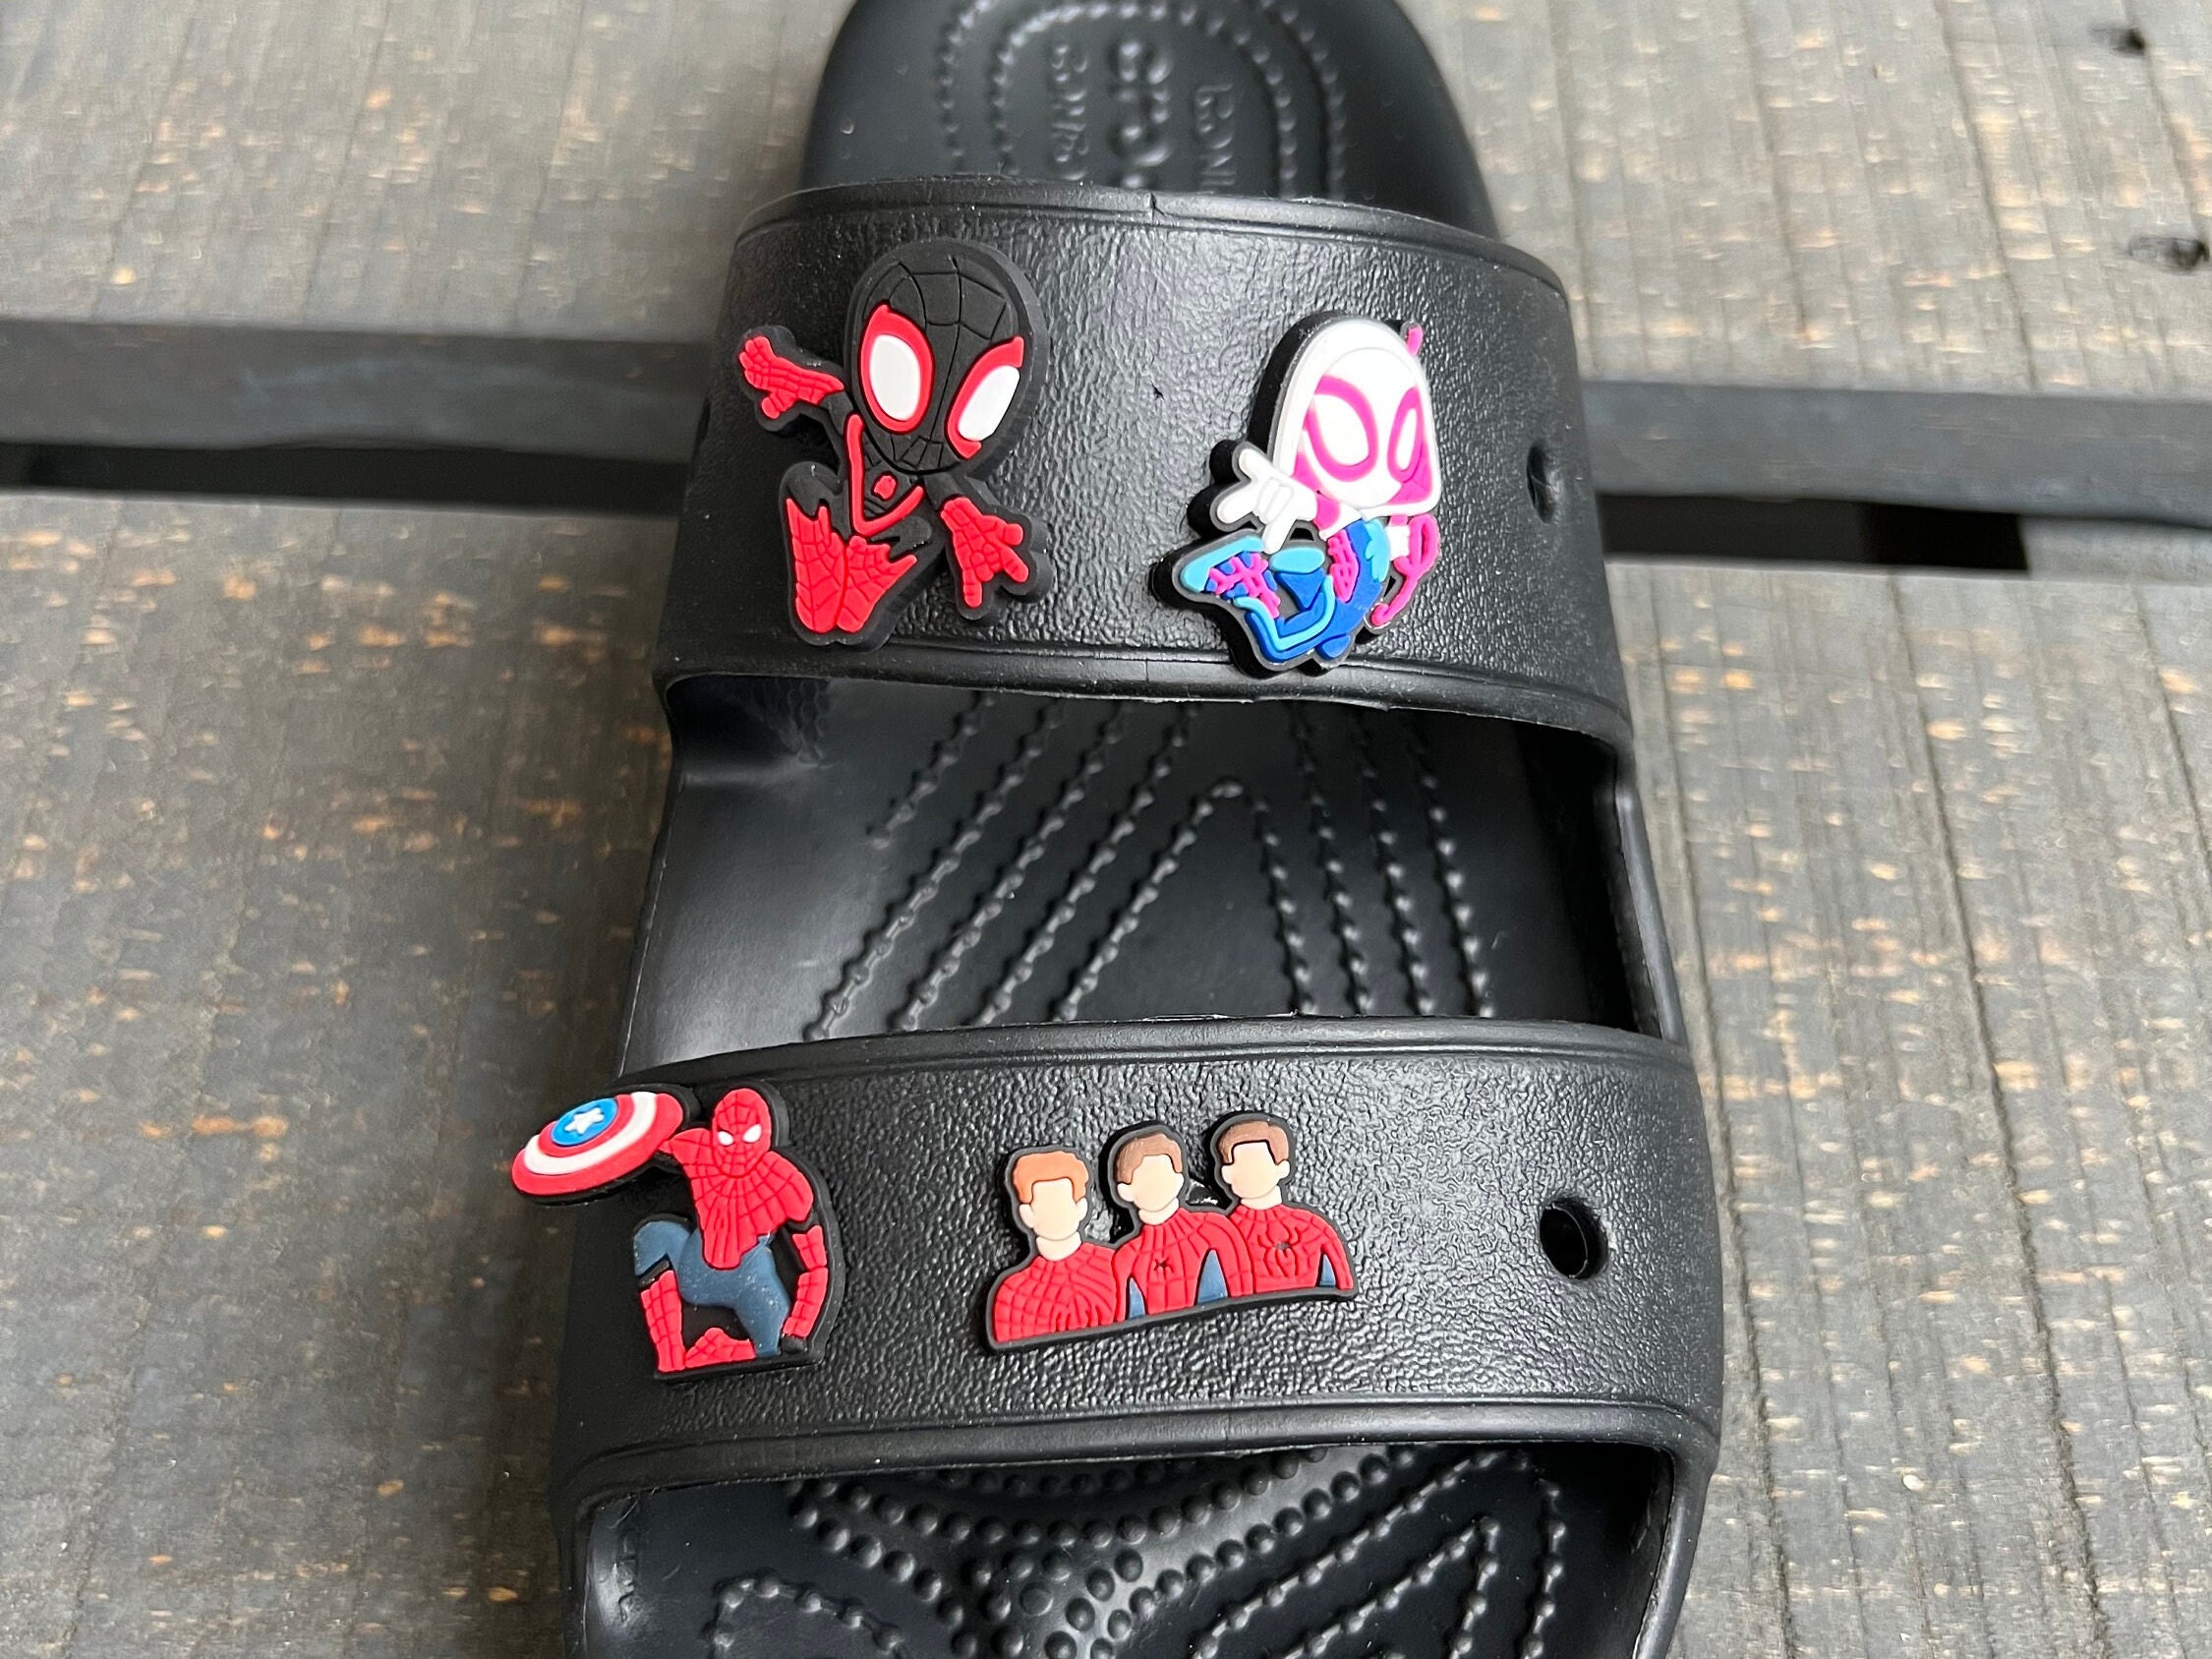 New Marvel Super Hero Spiderman Shoe Buckle Croc Charms Novelty DIY  Slippers Accessories Souvenir Cartoon Decorations Kids Gifts